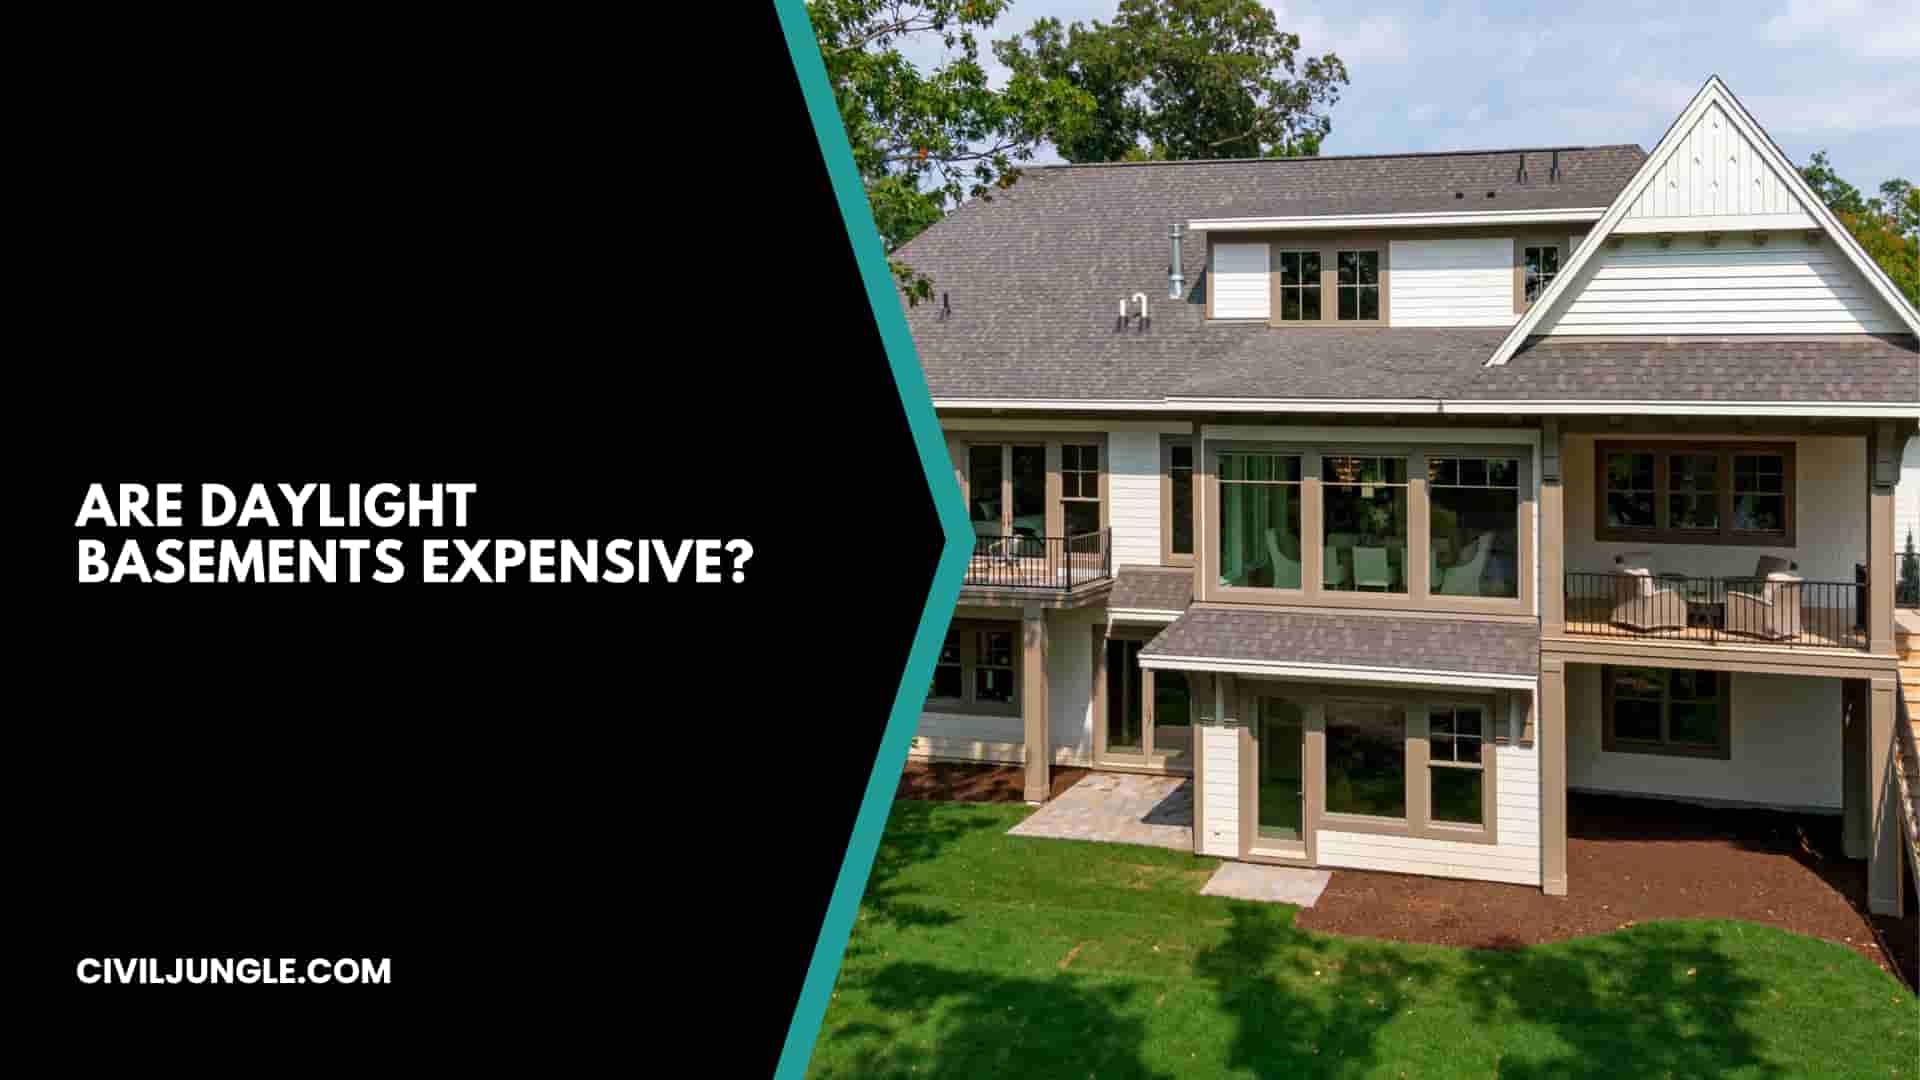 Are Daylight Basements Expensive?